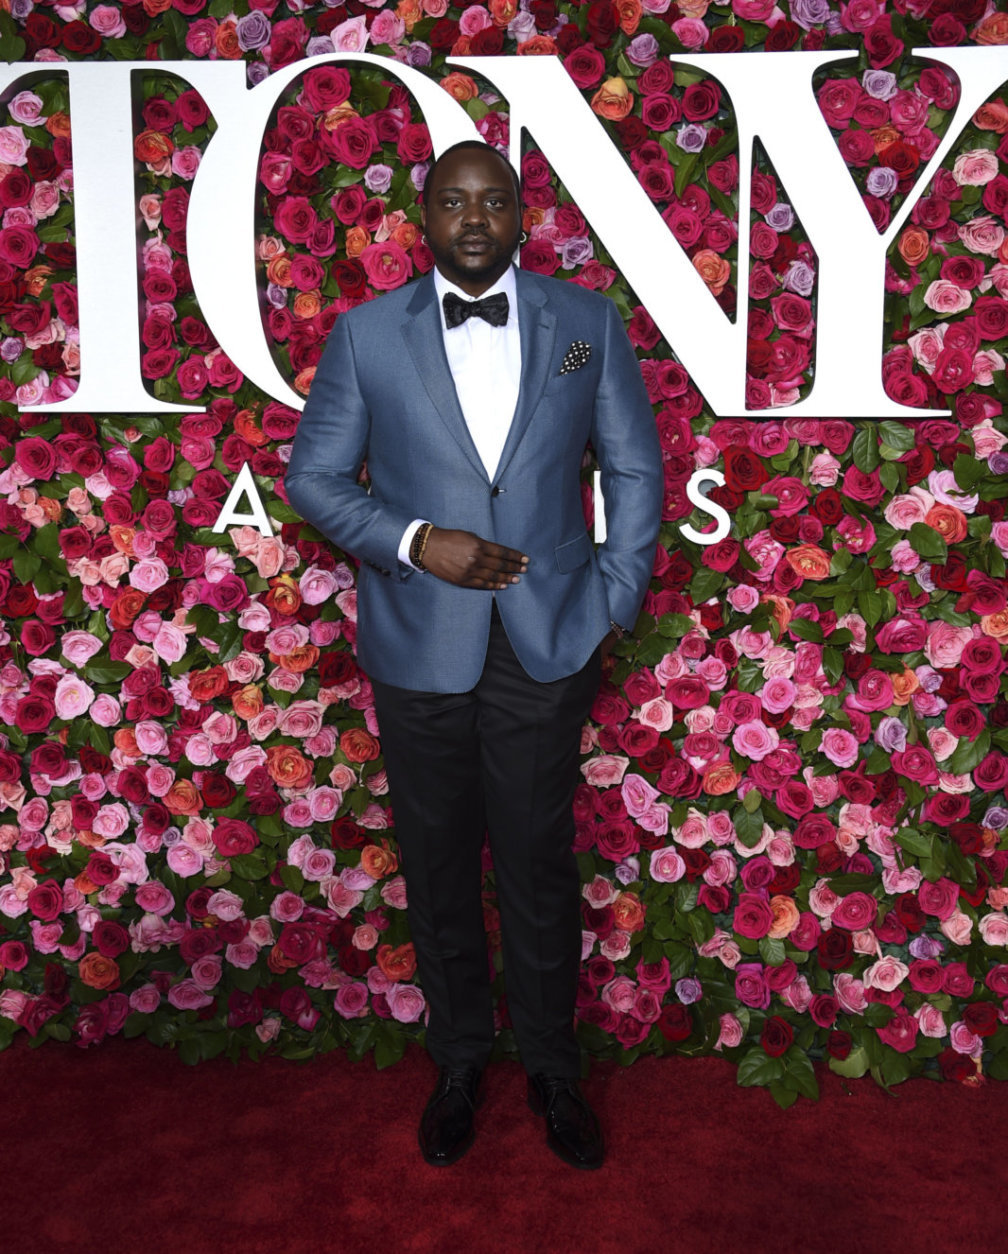 Brian Tyree Henry arrives at the 72nd annual Tony Awards at Radio City Music Hall on Sunday, June 10, 2018, in New York. (Photo by Evan Agostini/Invision/AP)